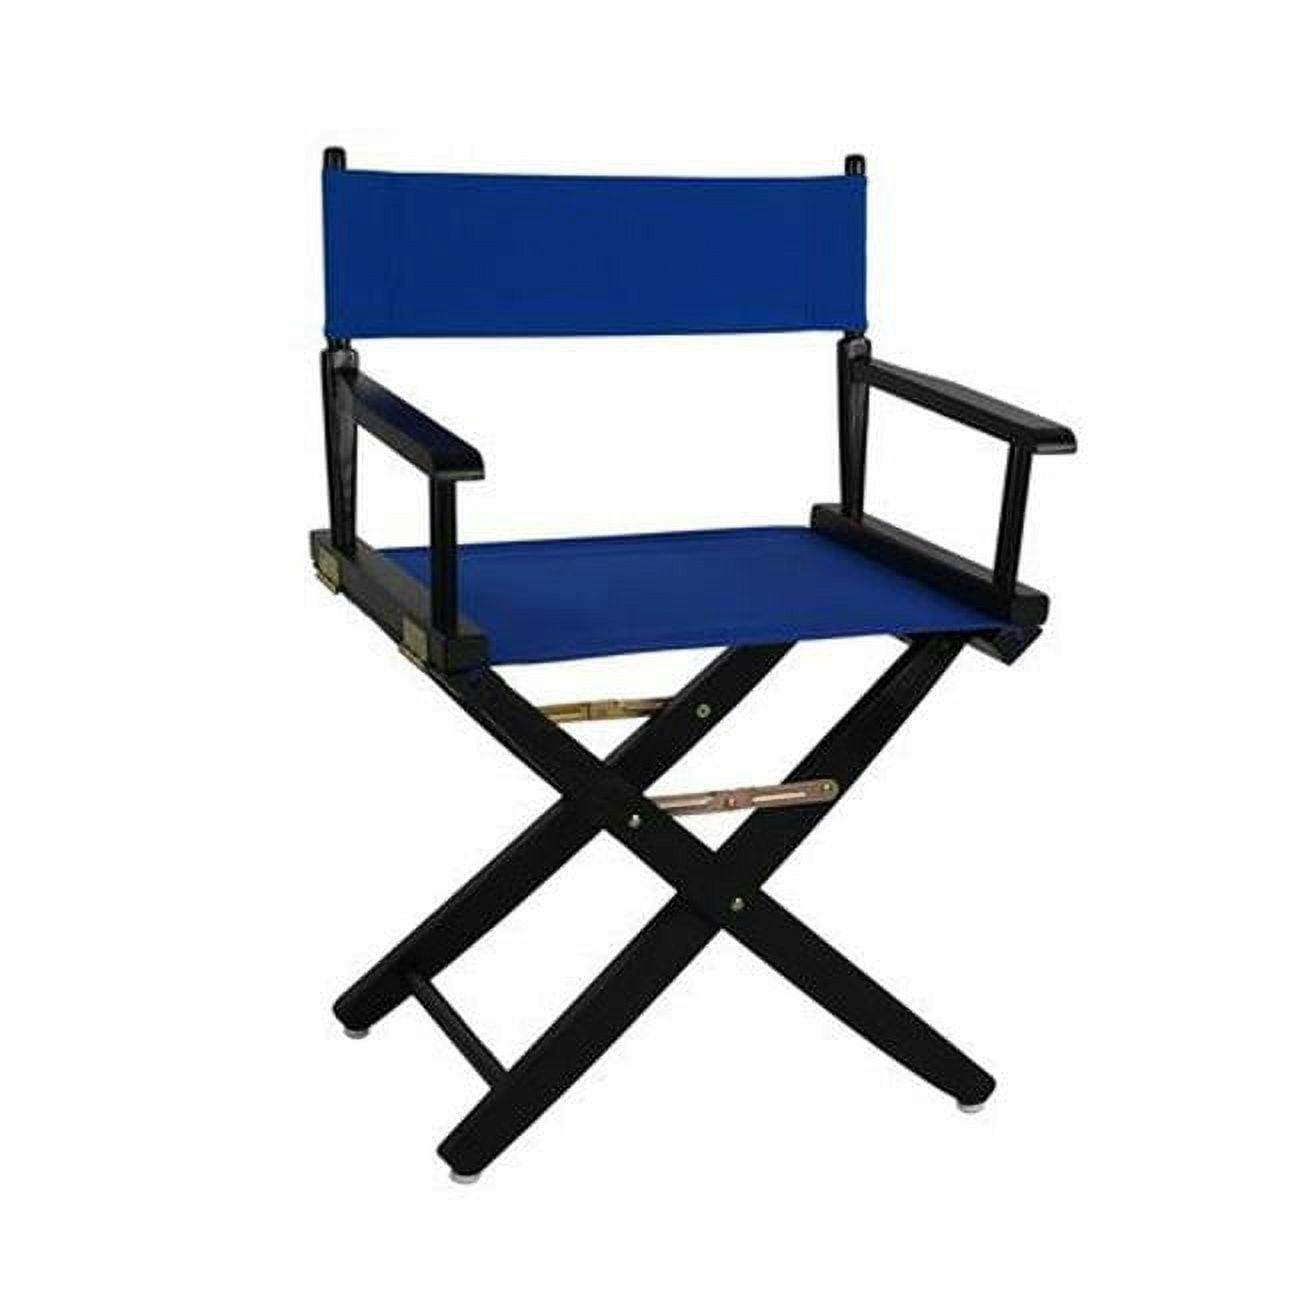 Luxurious 18" Black and Royal Blue Wood Director's Chair